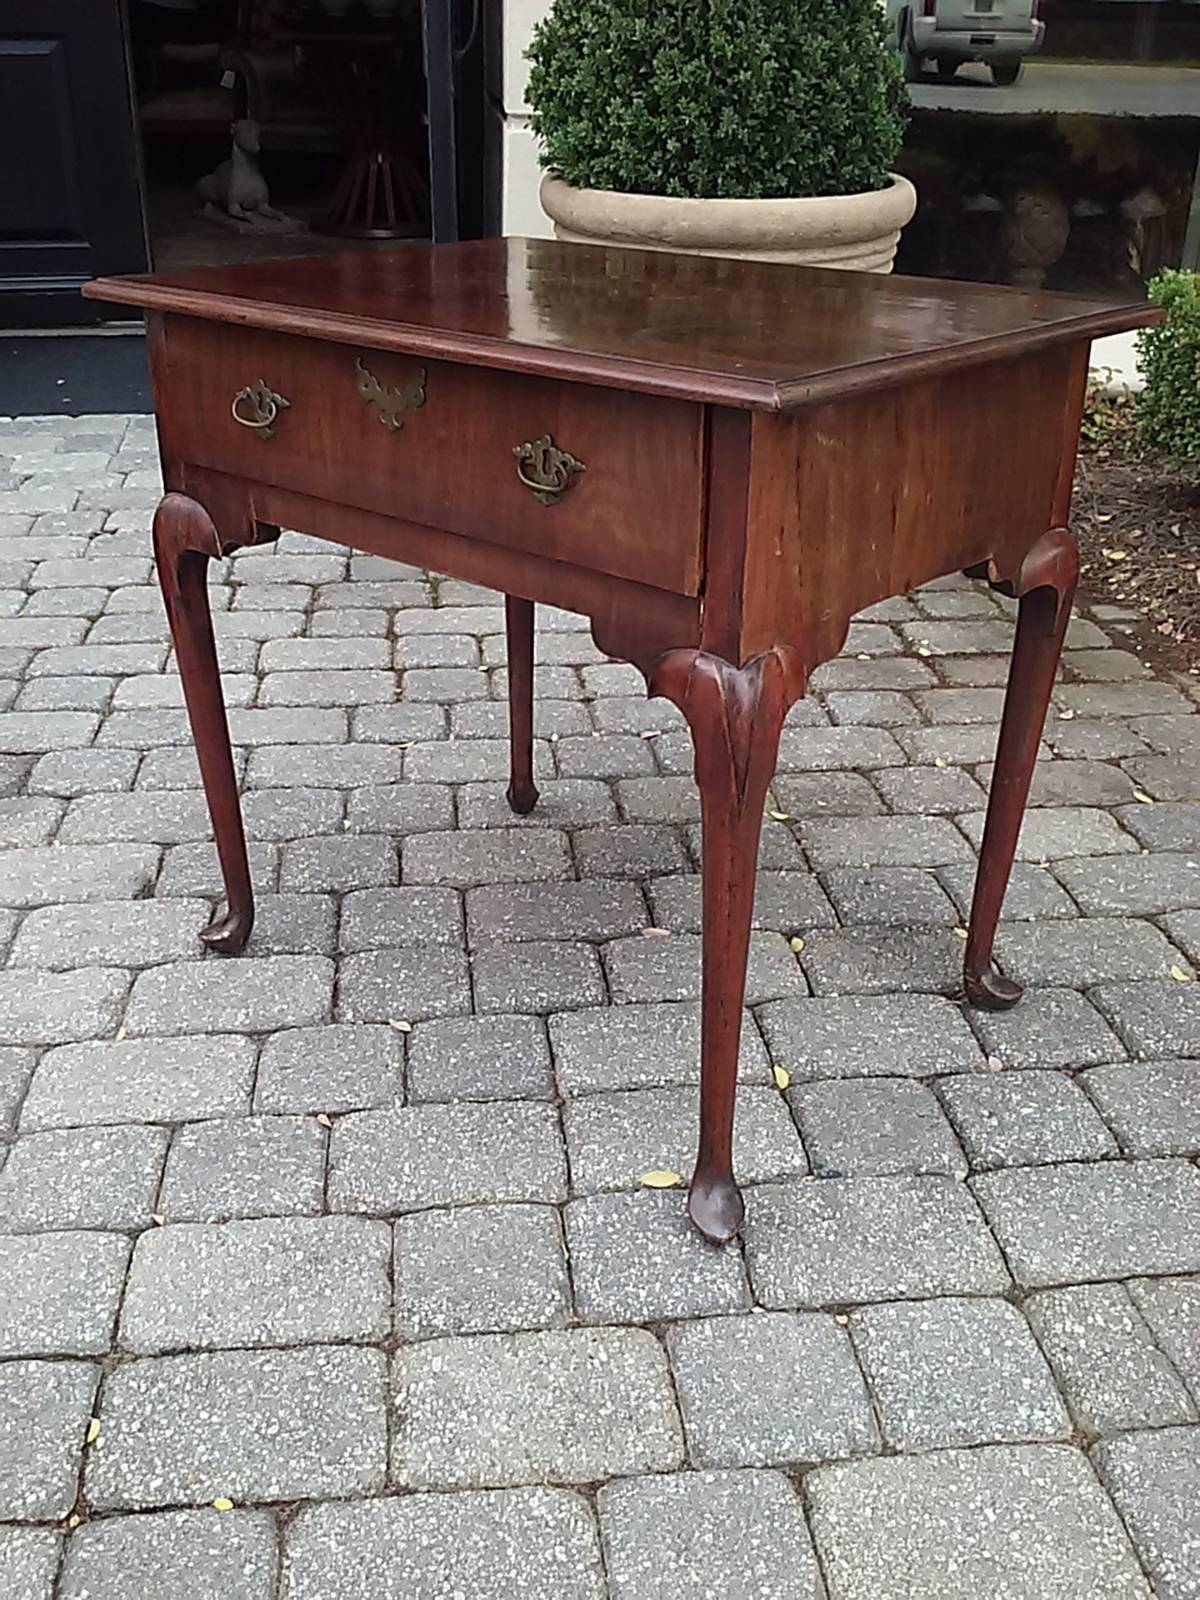 18th-19th century English walnut table with single drawer.